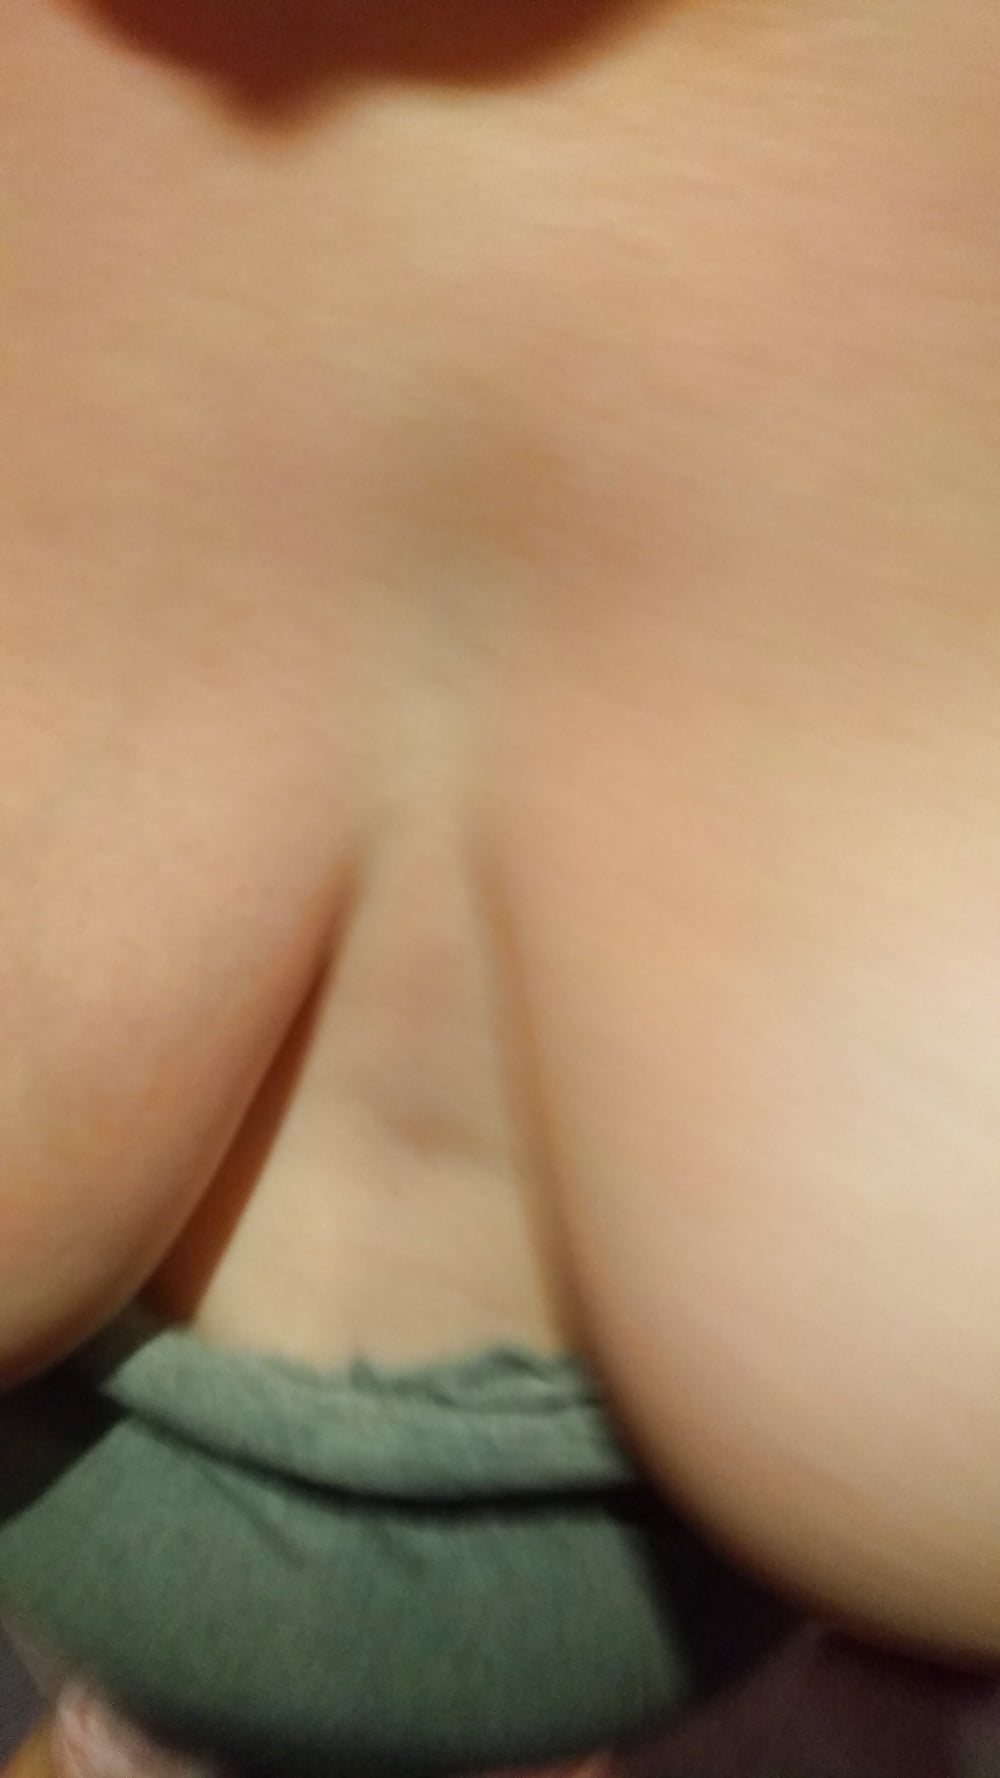 BBW_wife_38FF_natural_breasts_showing_her_tits (10/17)